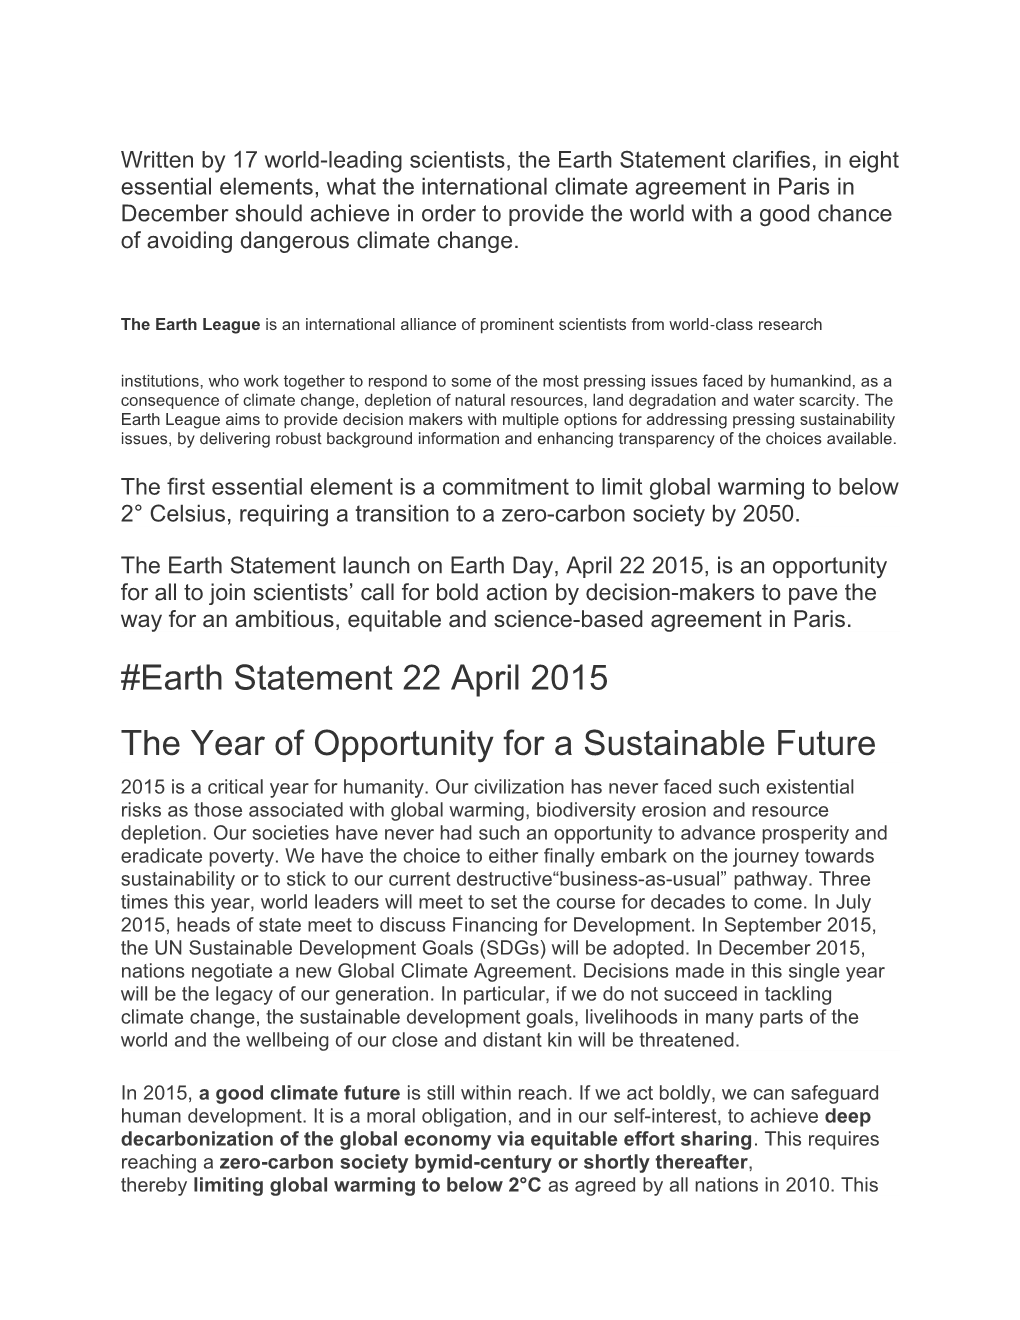 The Year of Opportunity for a Sustainable Future